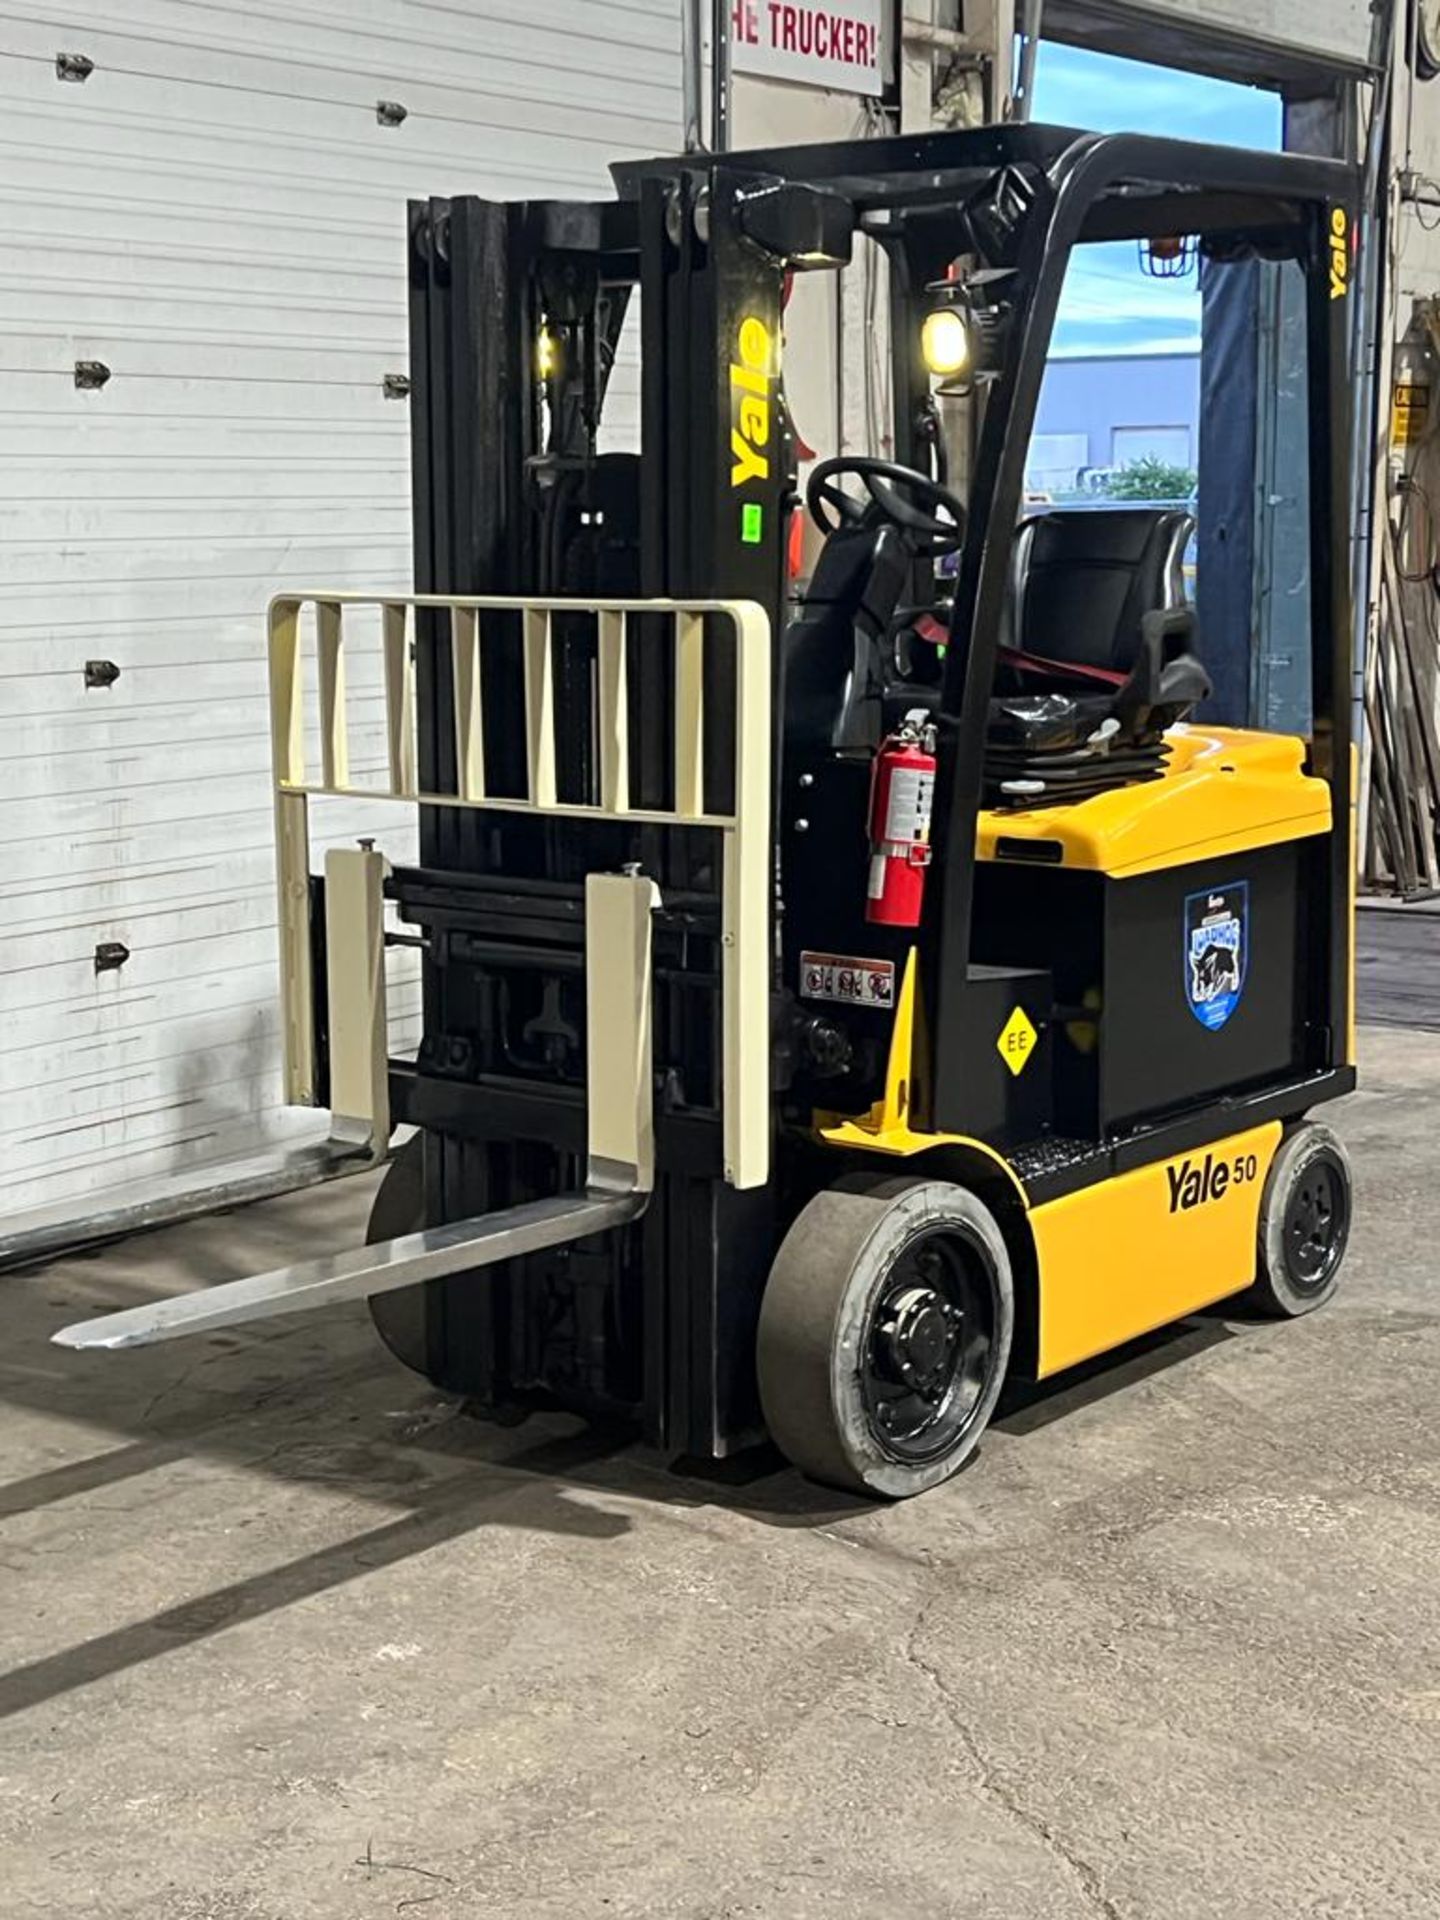 2016 Yale 5,000lbs Capacity EXPLOSION PROOF Forklift Electric 48V with Sideshift and 3-stage Mast - Image 2 of 4